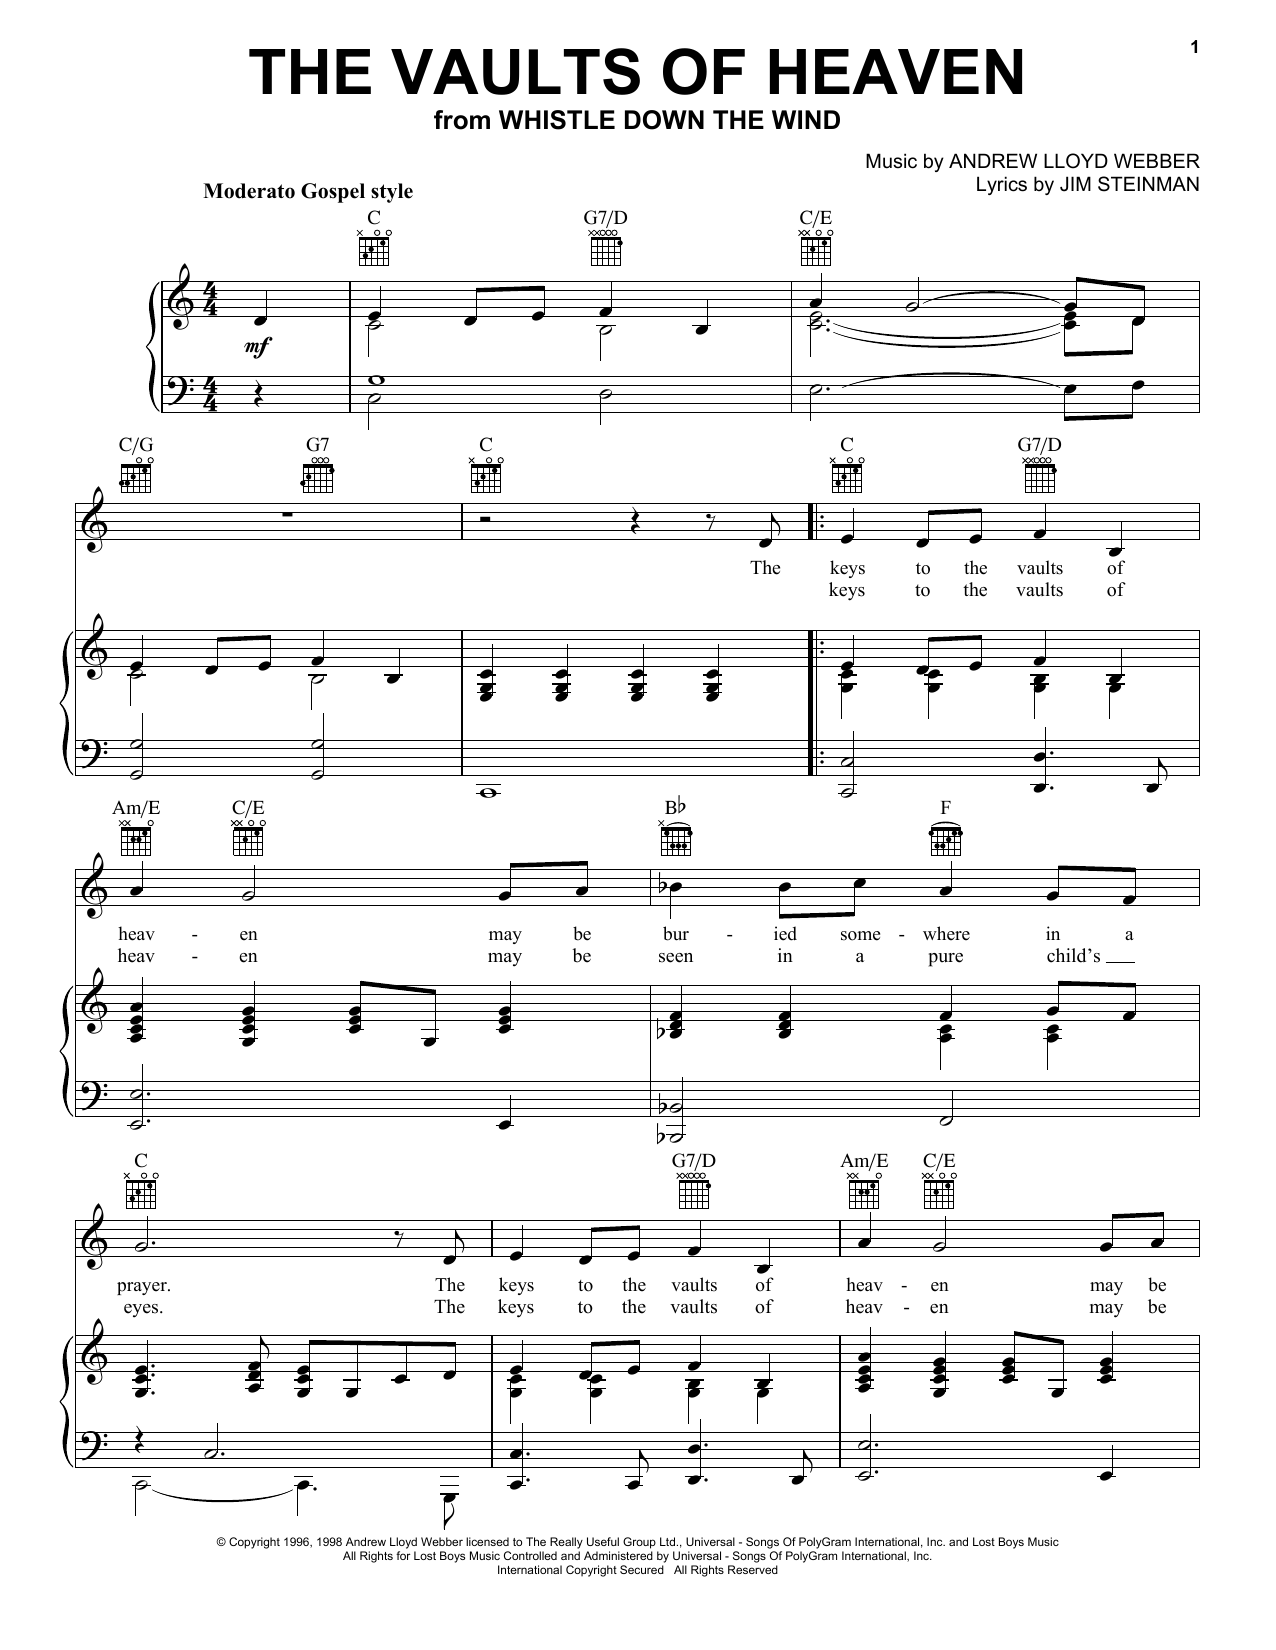 Andrew Lloyd Webber The Vaults Of Heaven sheet music notes and chords. Download Printable PDF.